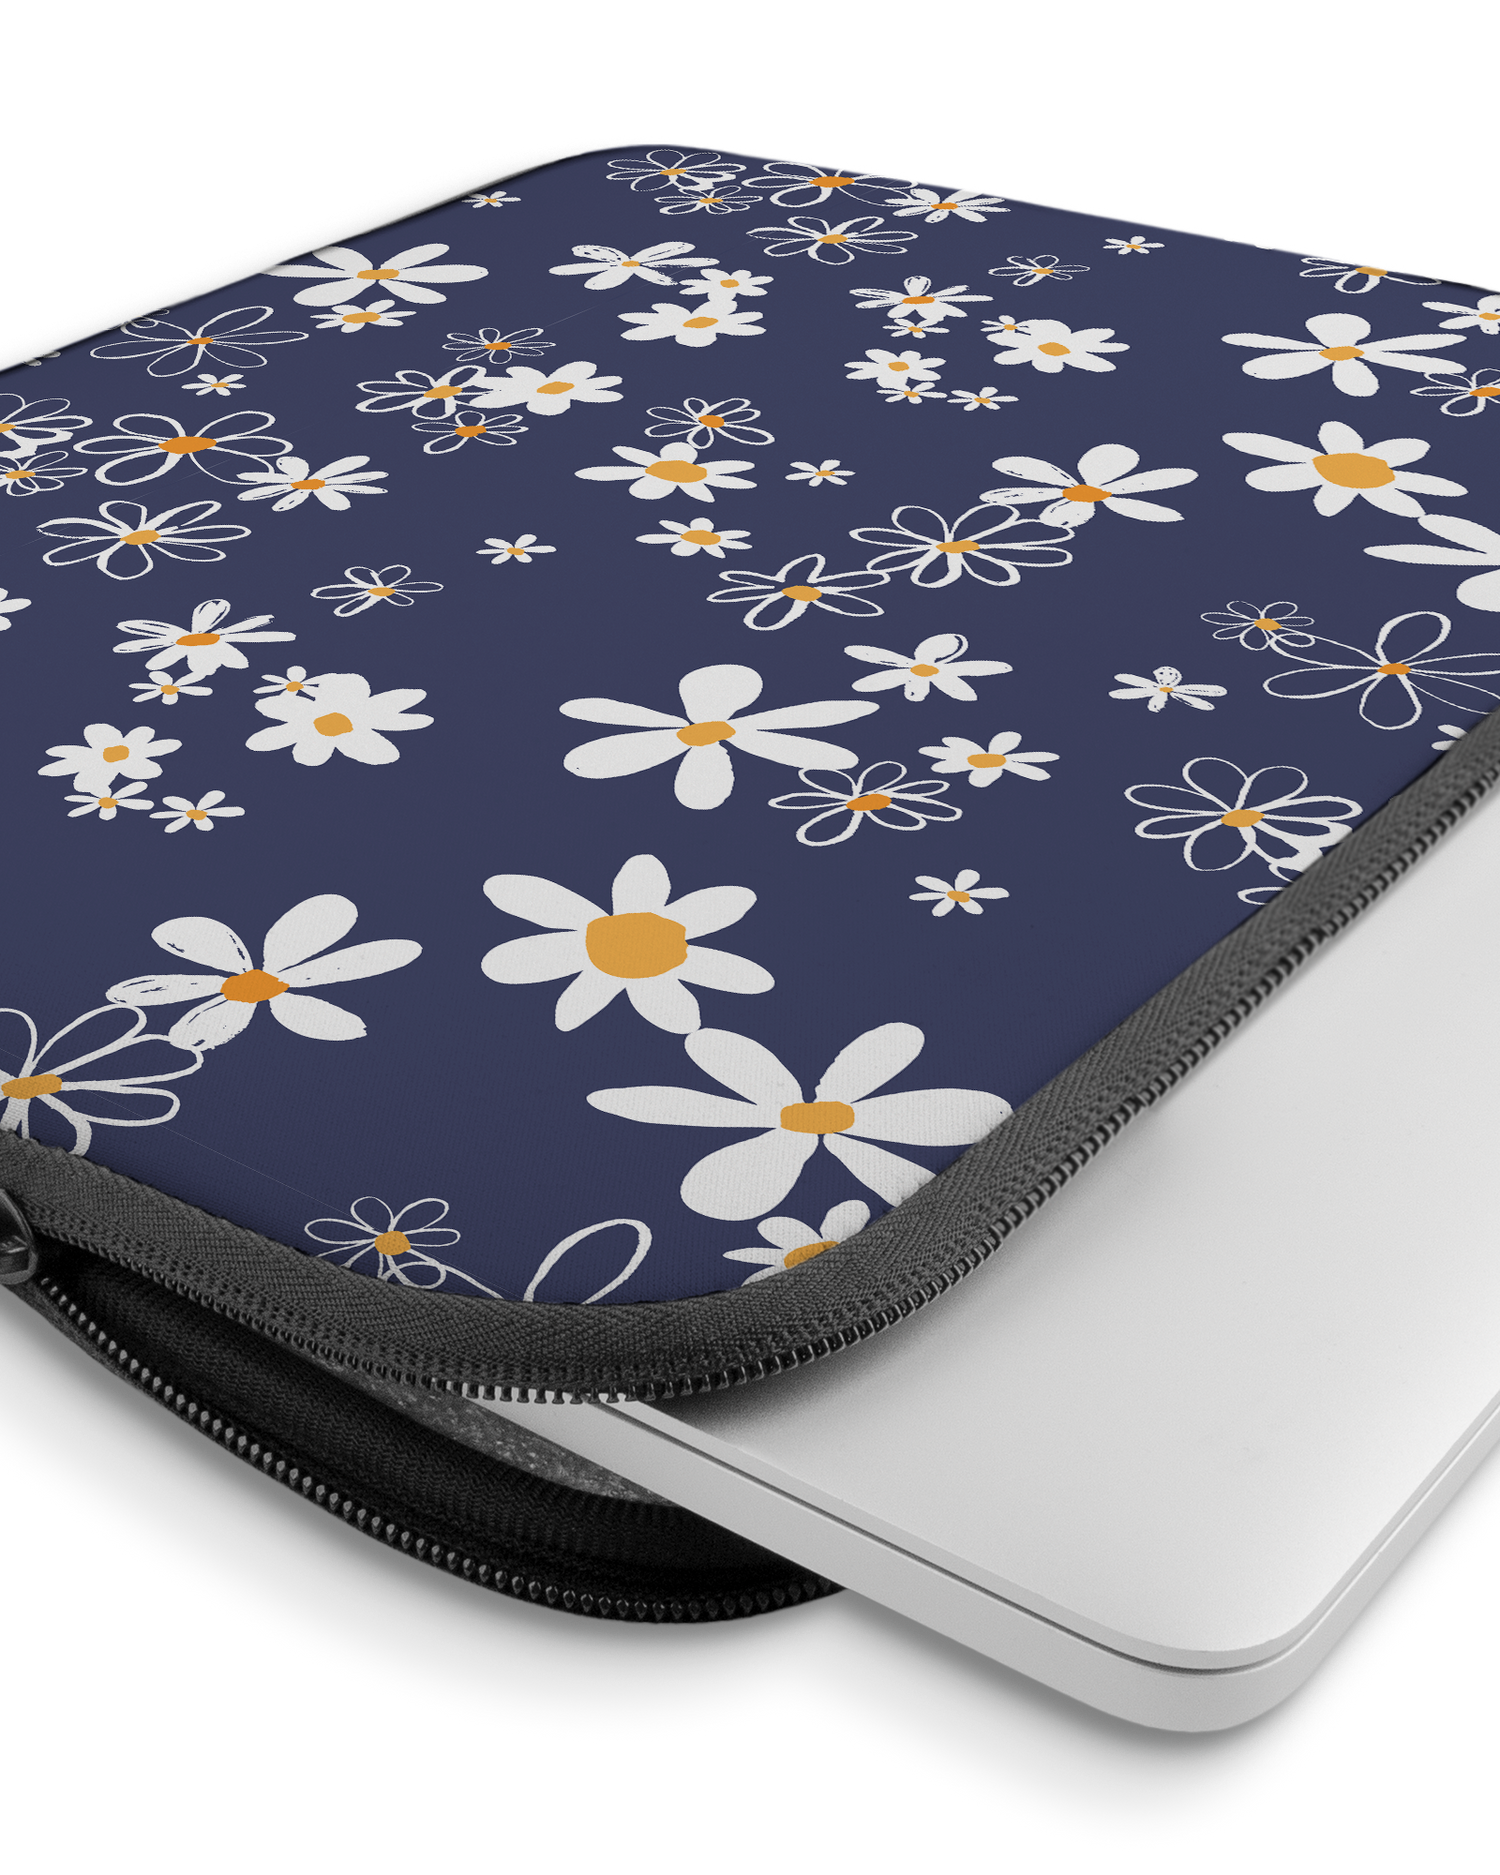 Navy Daisies Laptop Case 15 inch with device inside